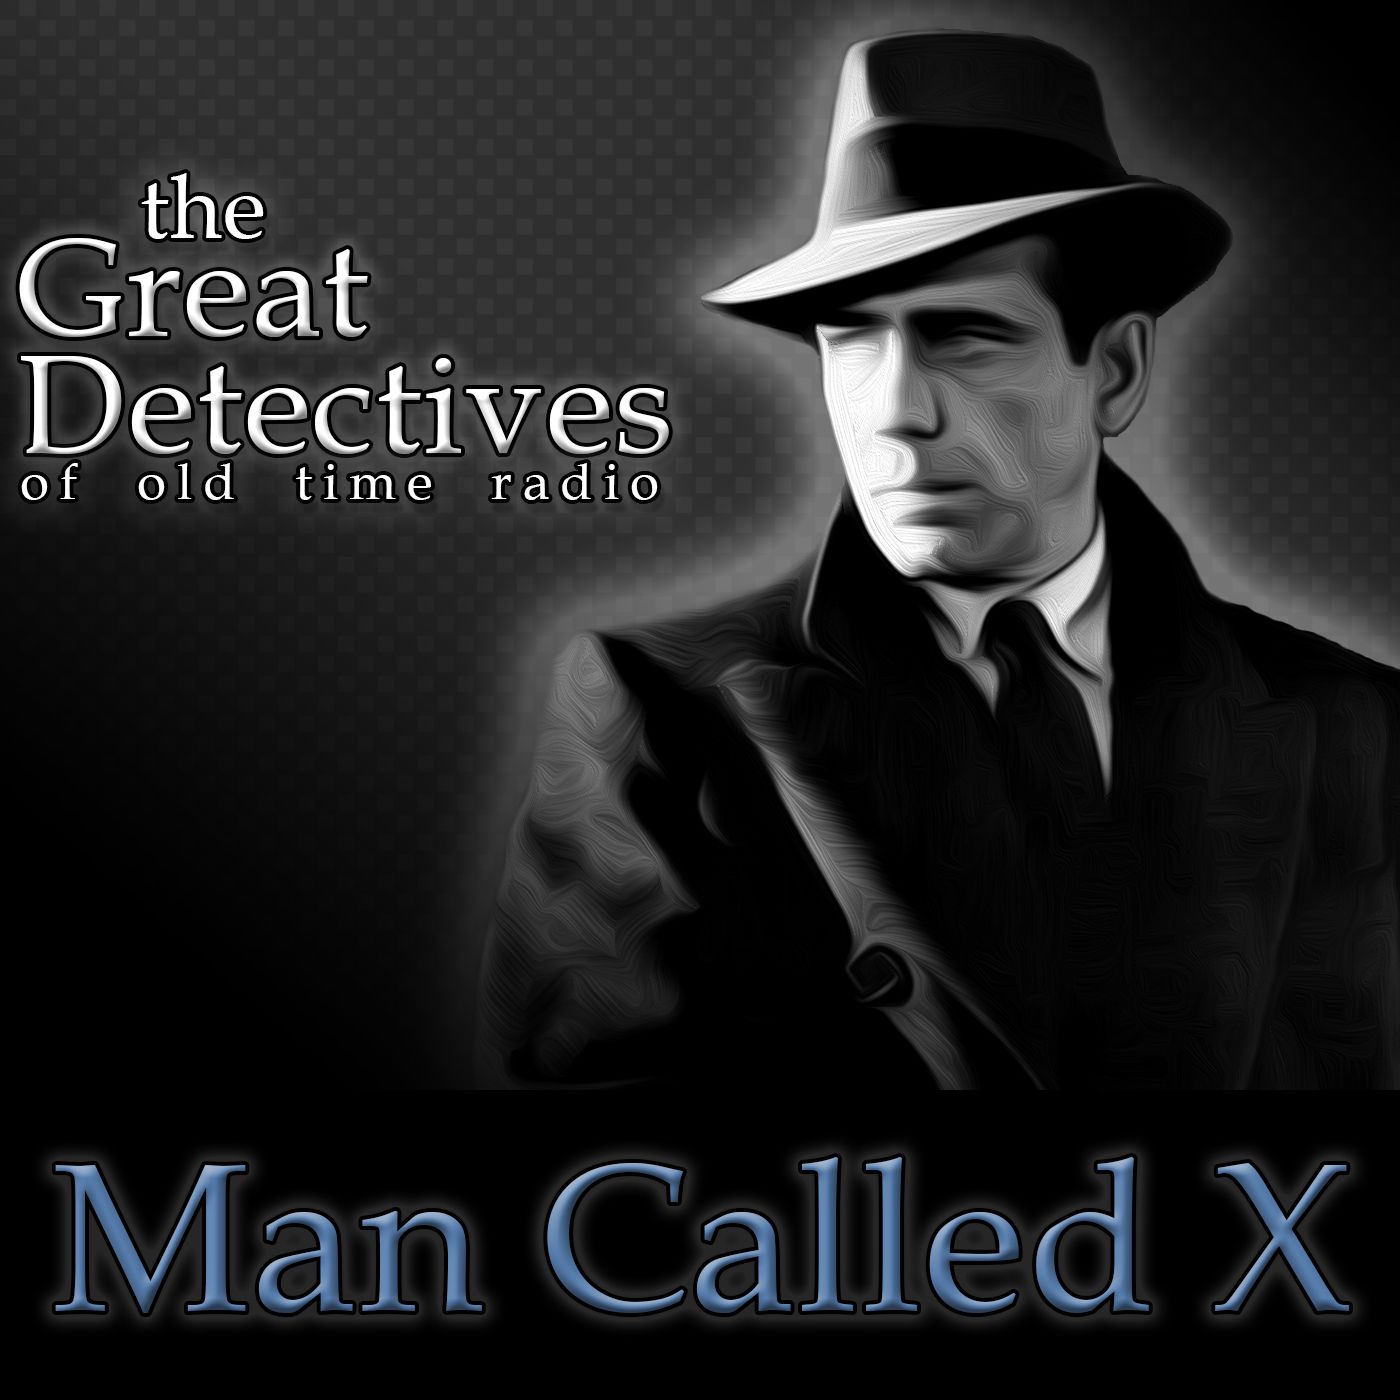 The Great Detectives Present the Man Called X